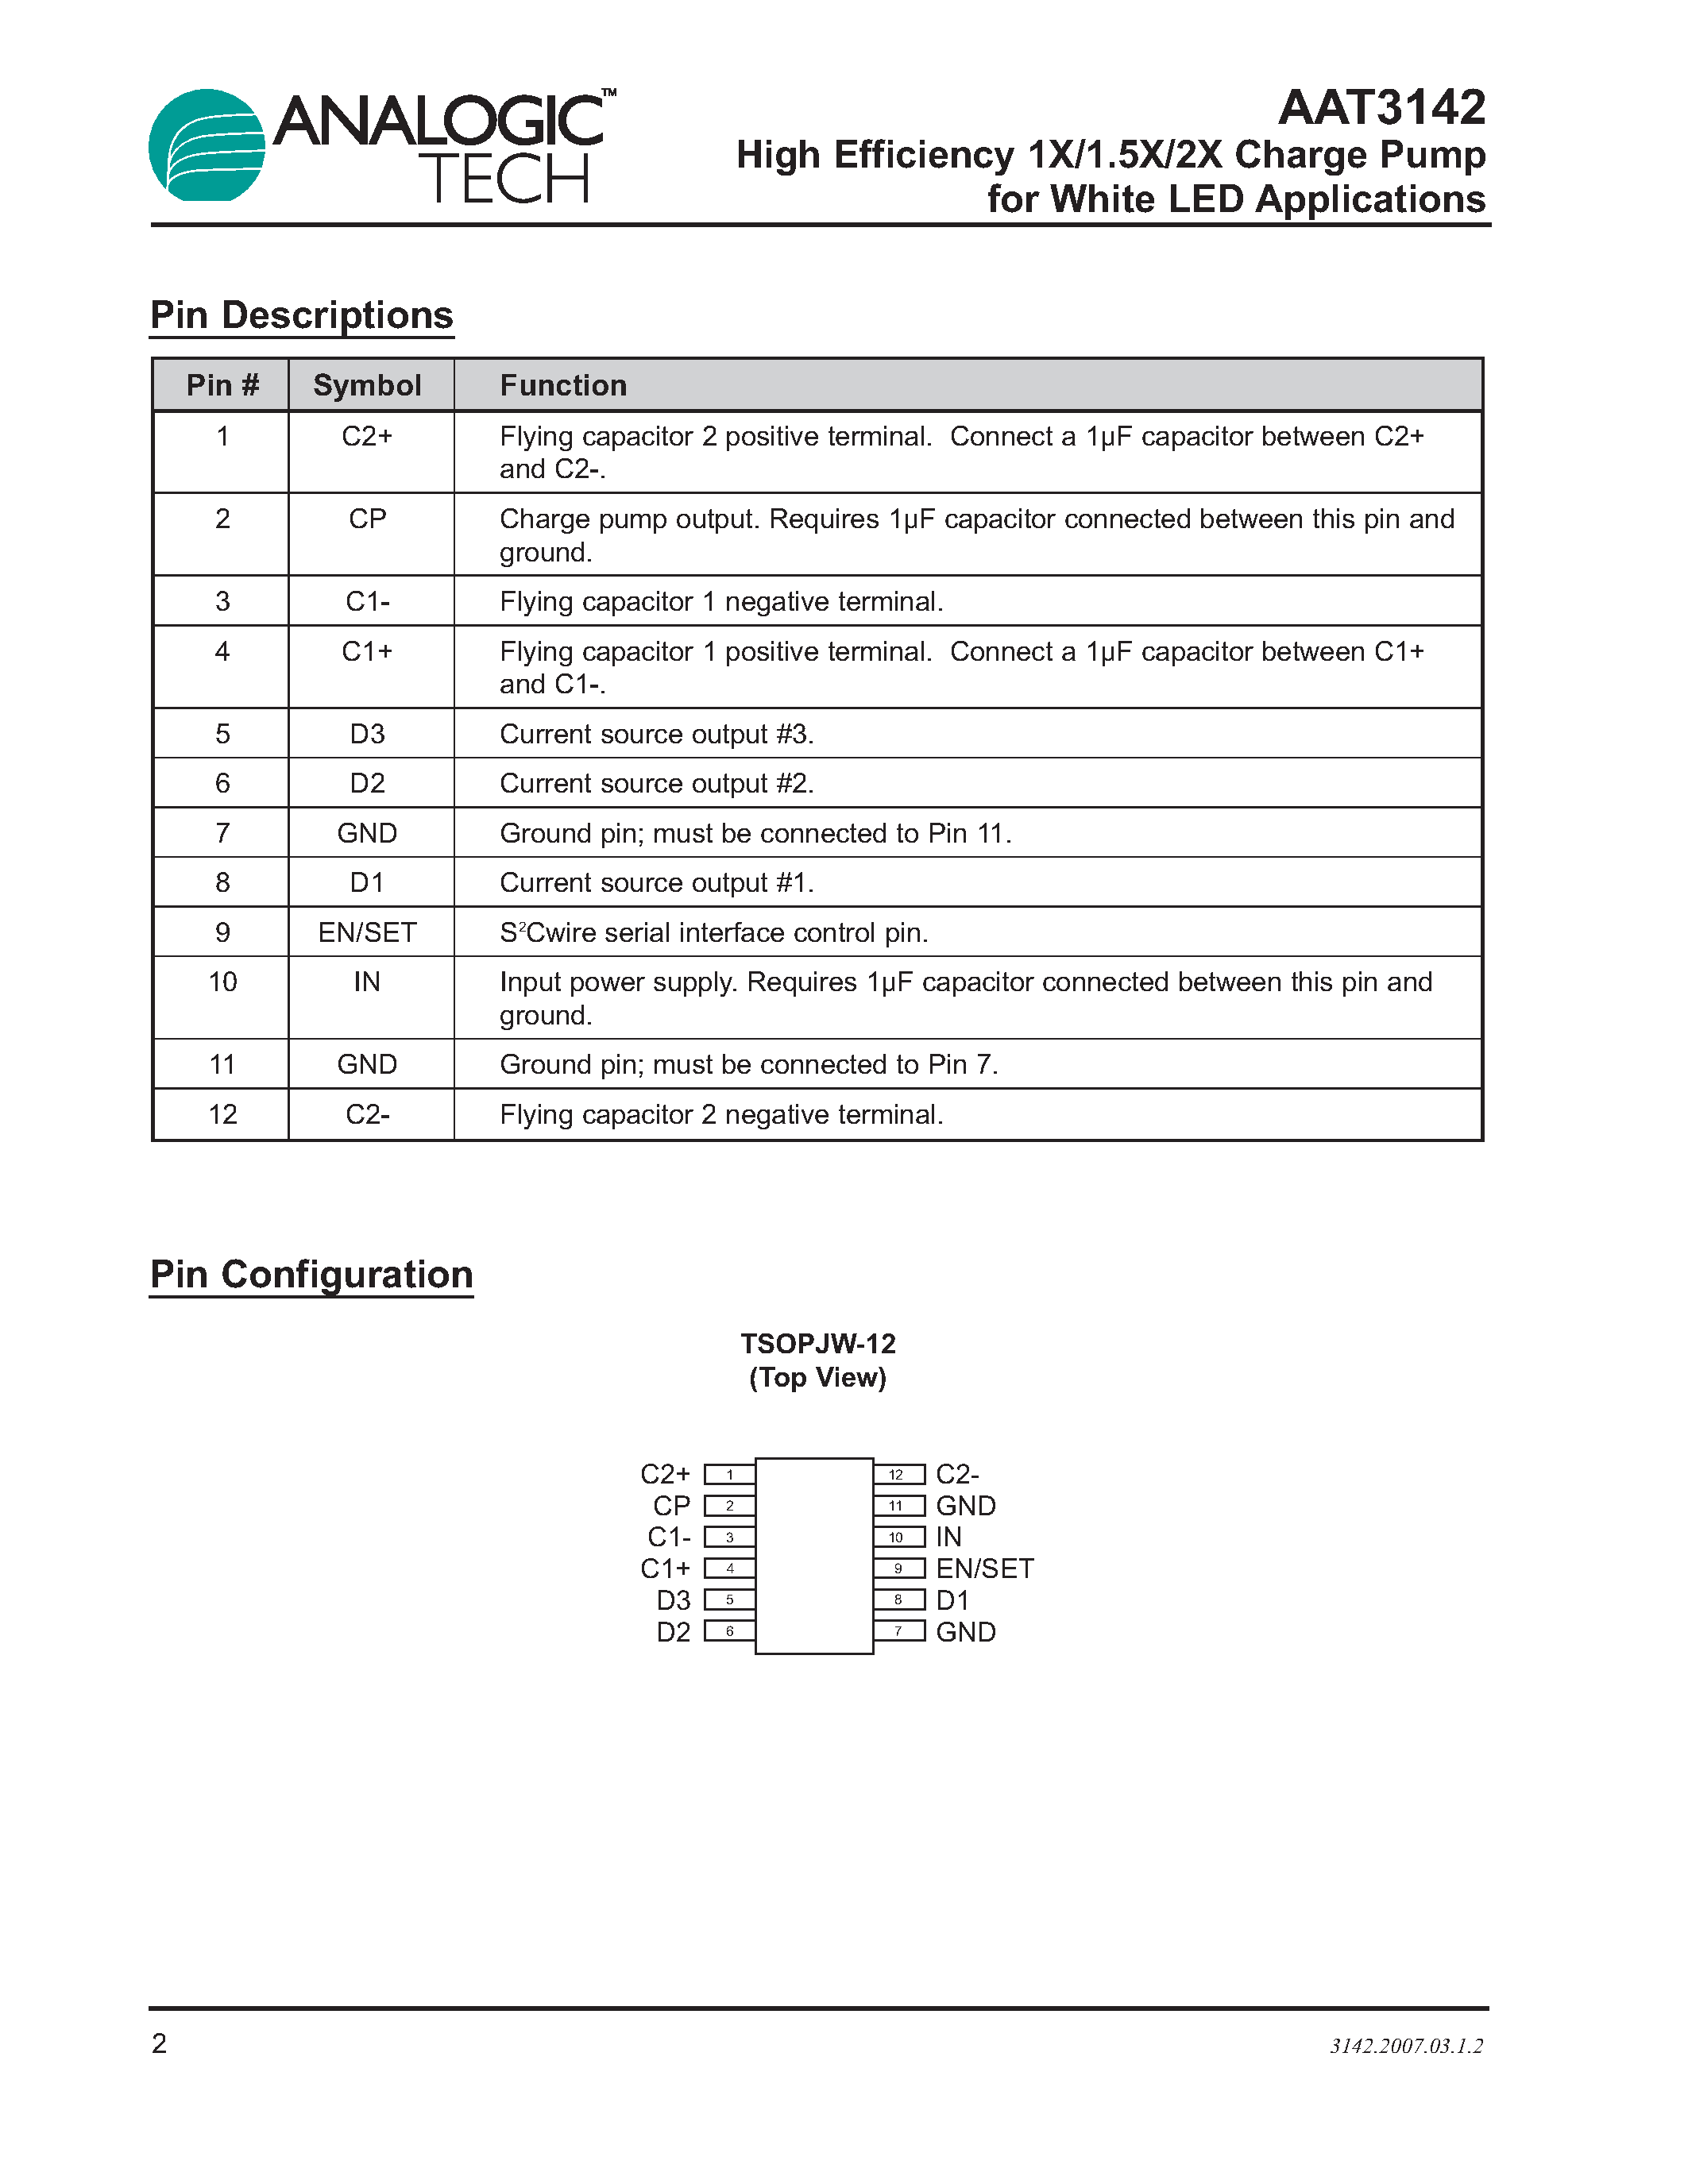 Datasheet AAT3142 - High Efficiency 1X/1.5X/2X Charge Pump page 2